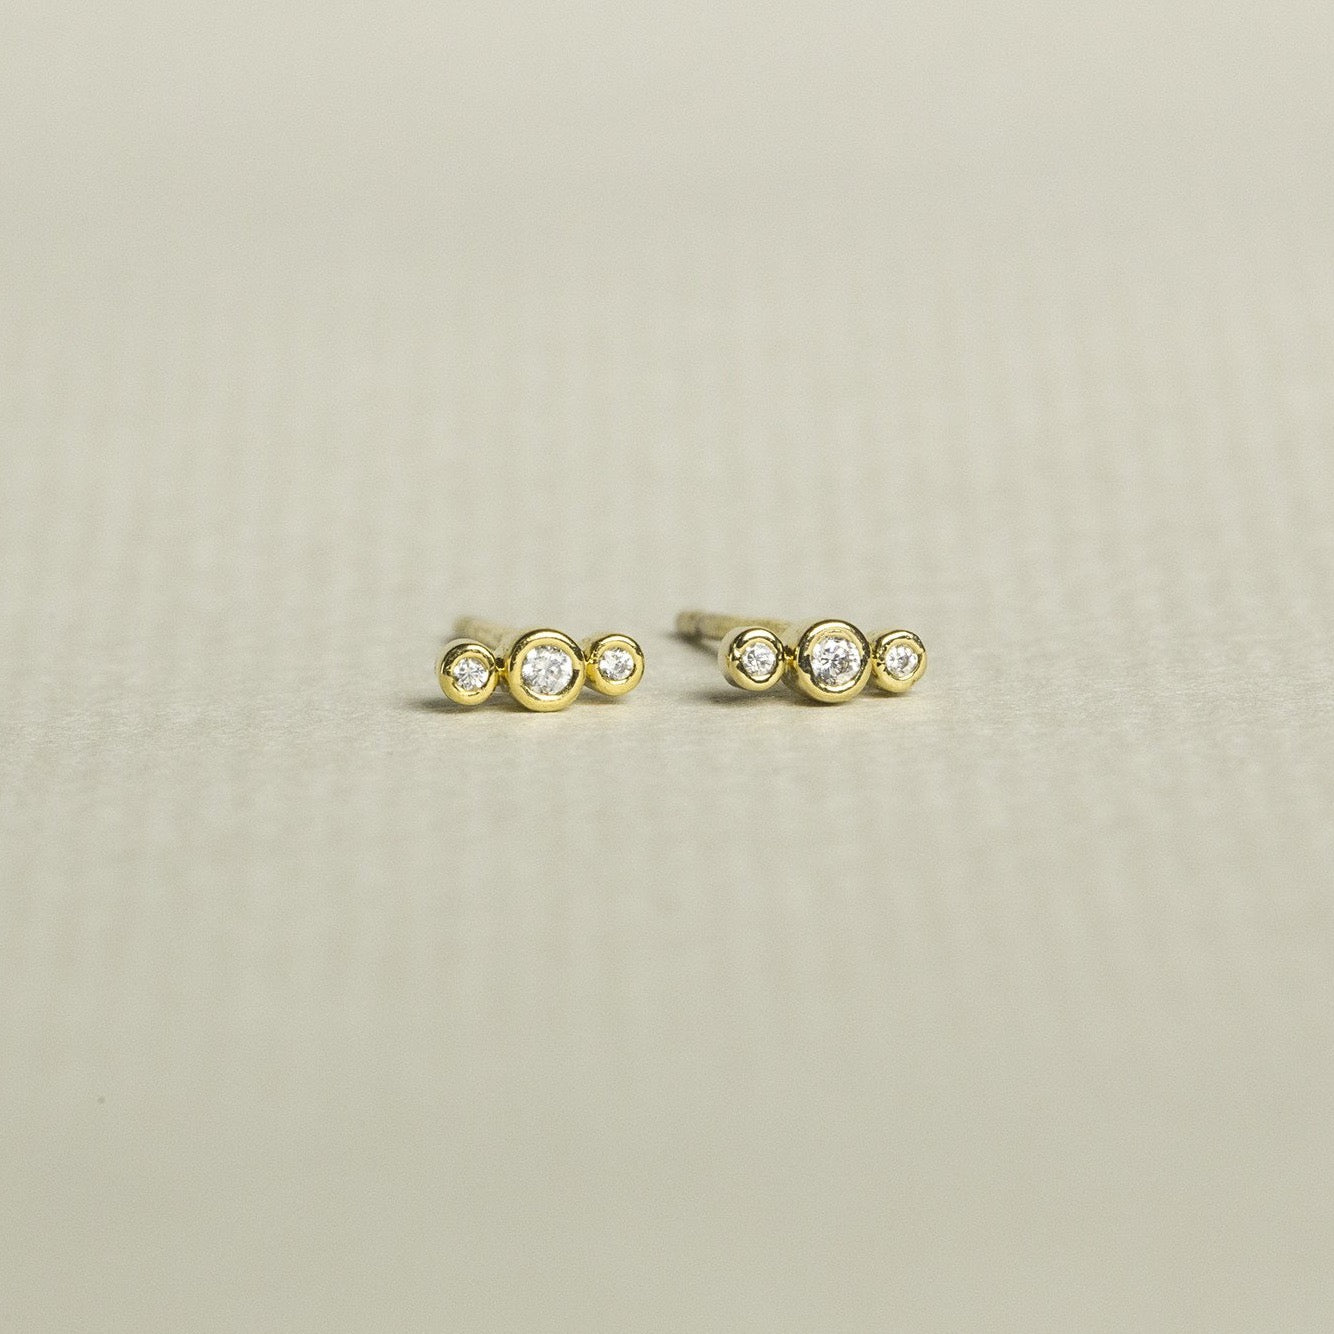 adorable satellite studs from Tai